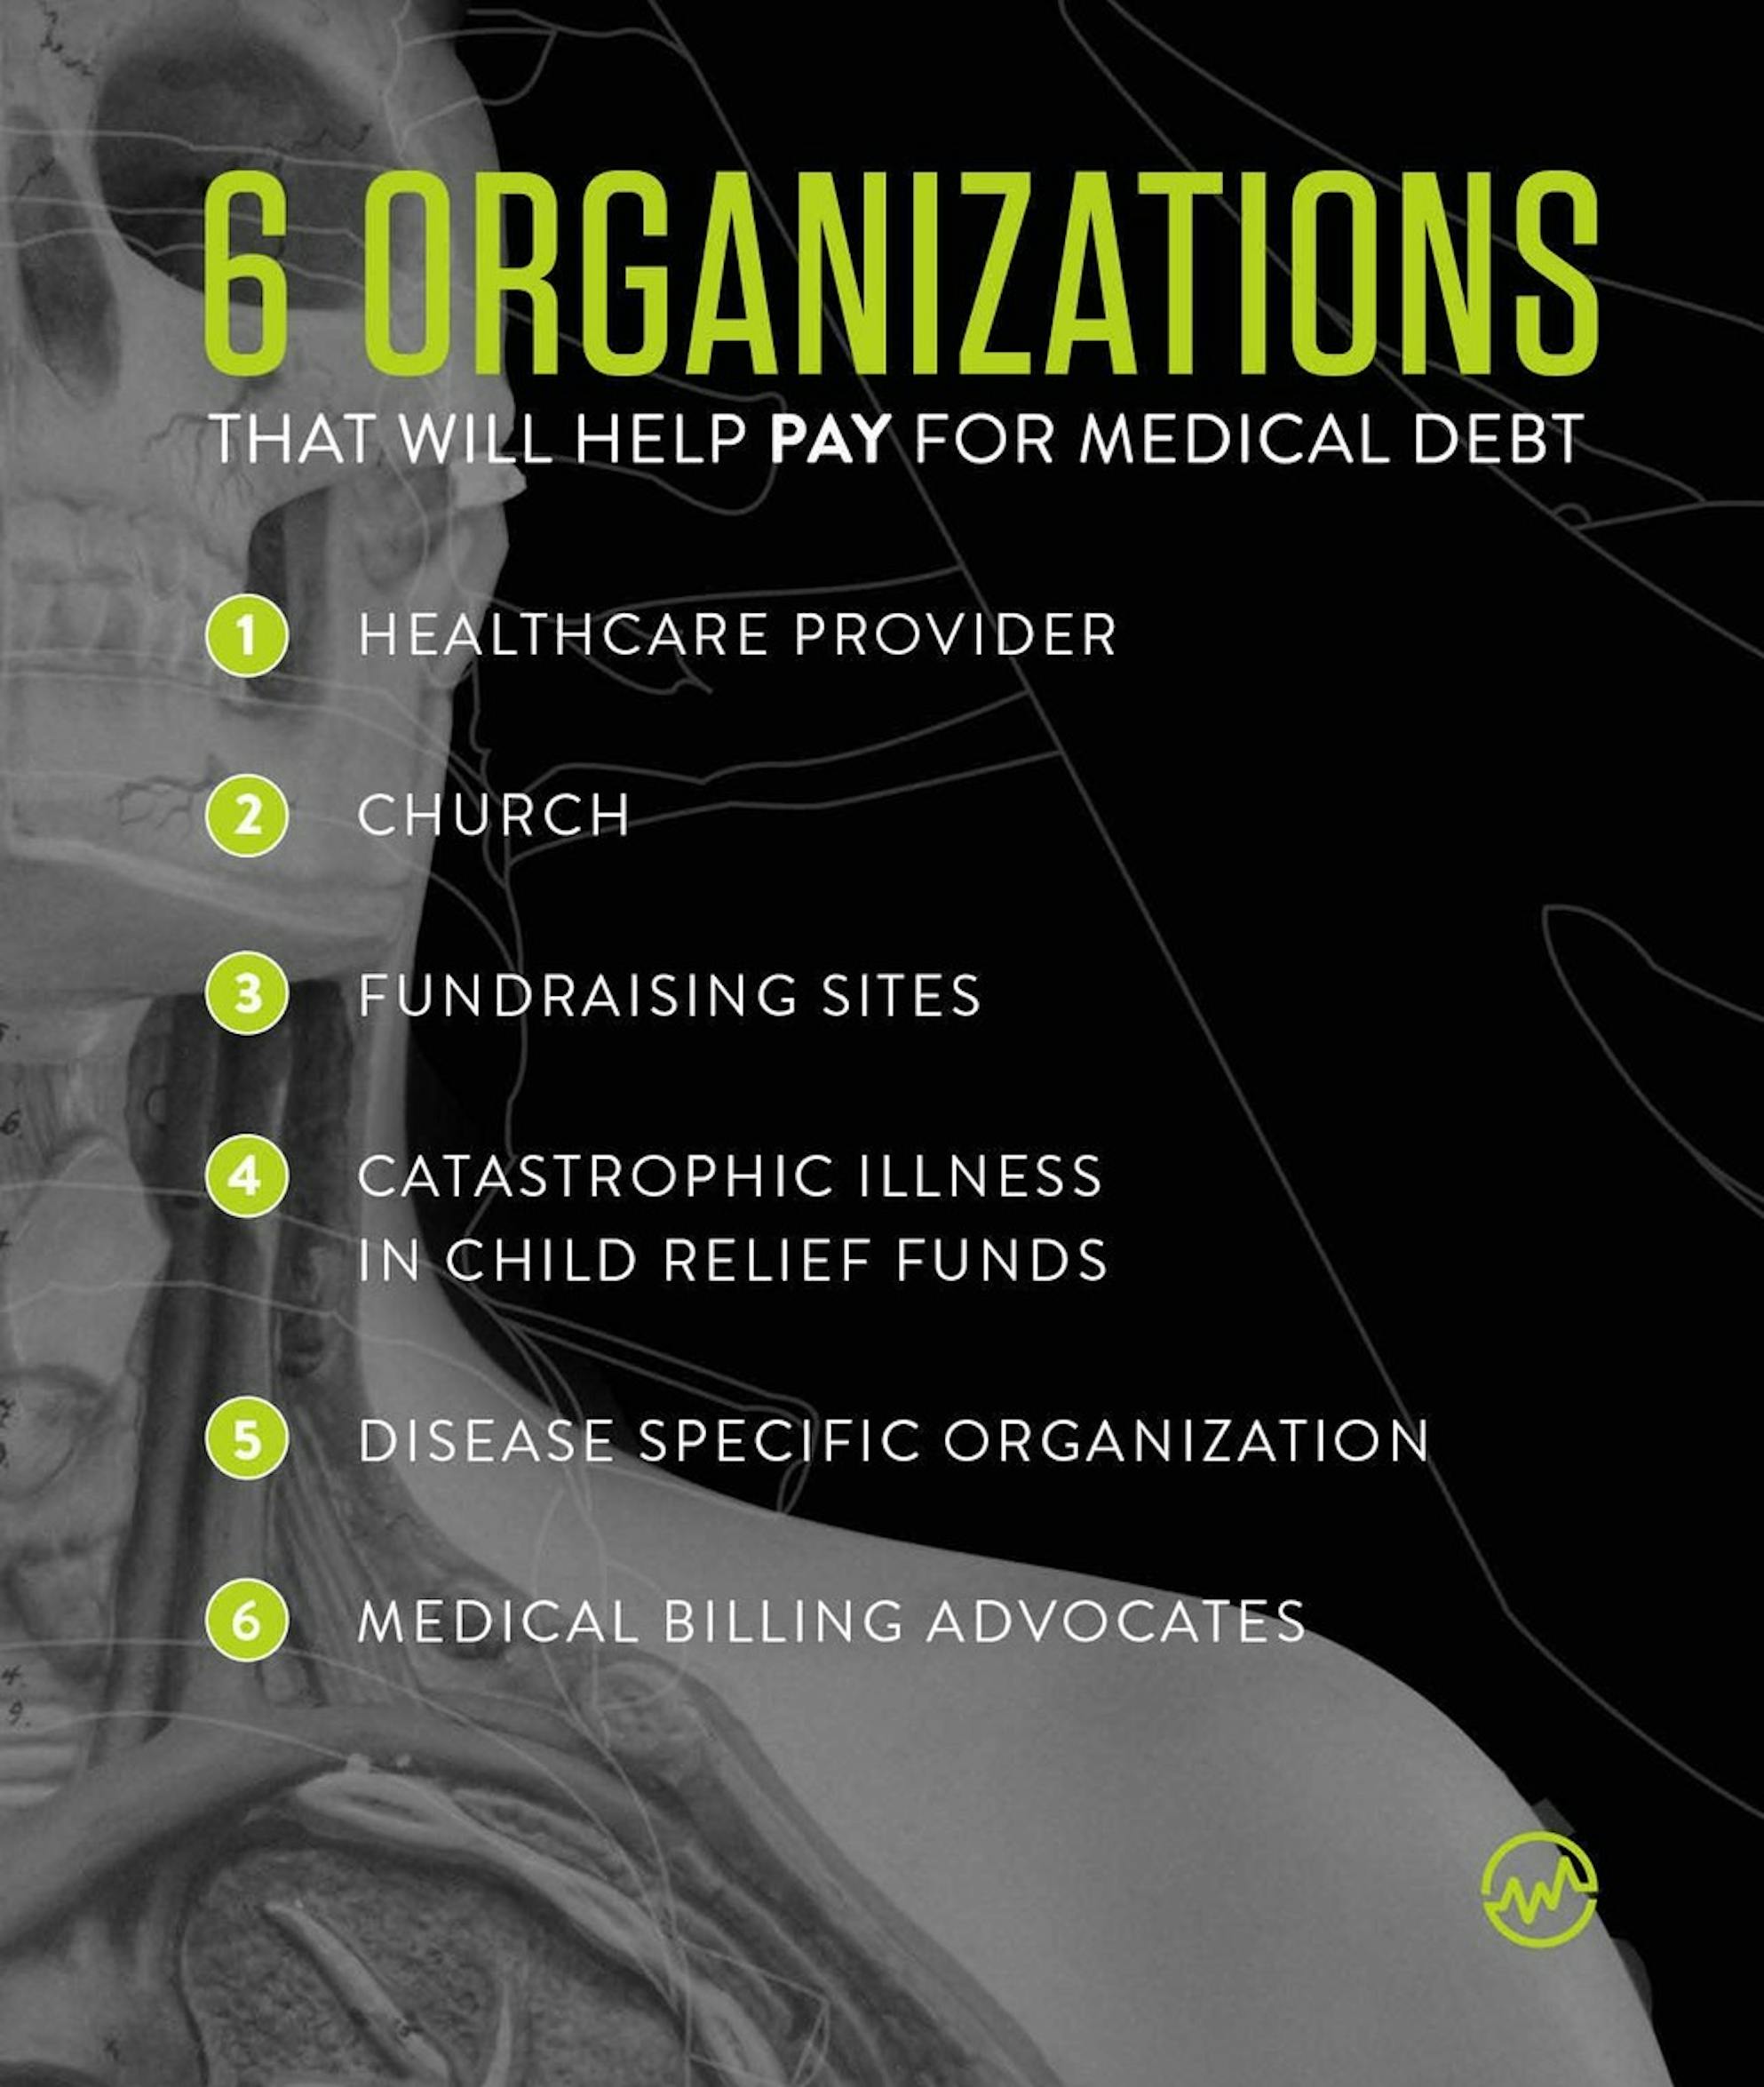 6 organizations that help pay medical bills: an X ray image of a patient's head, chest and shoulder